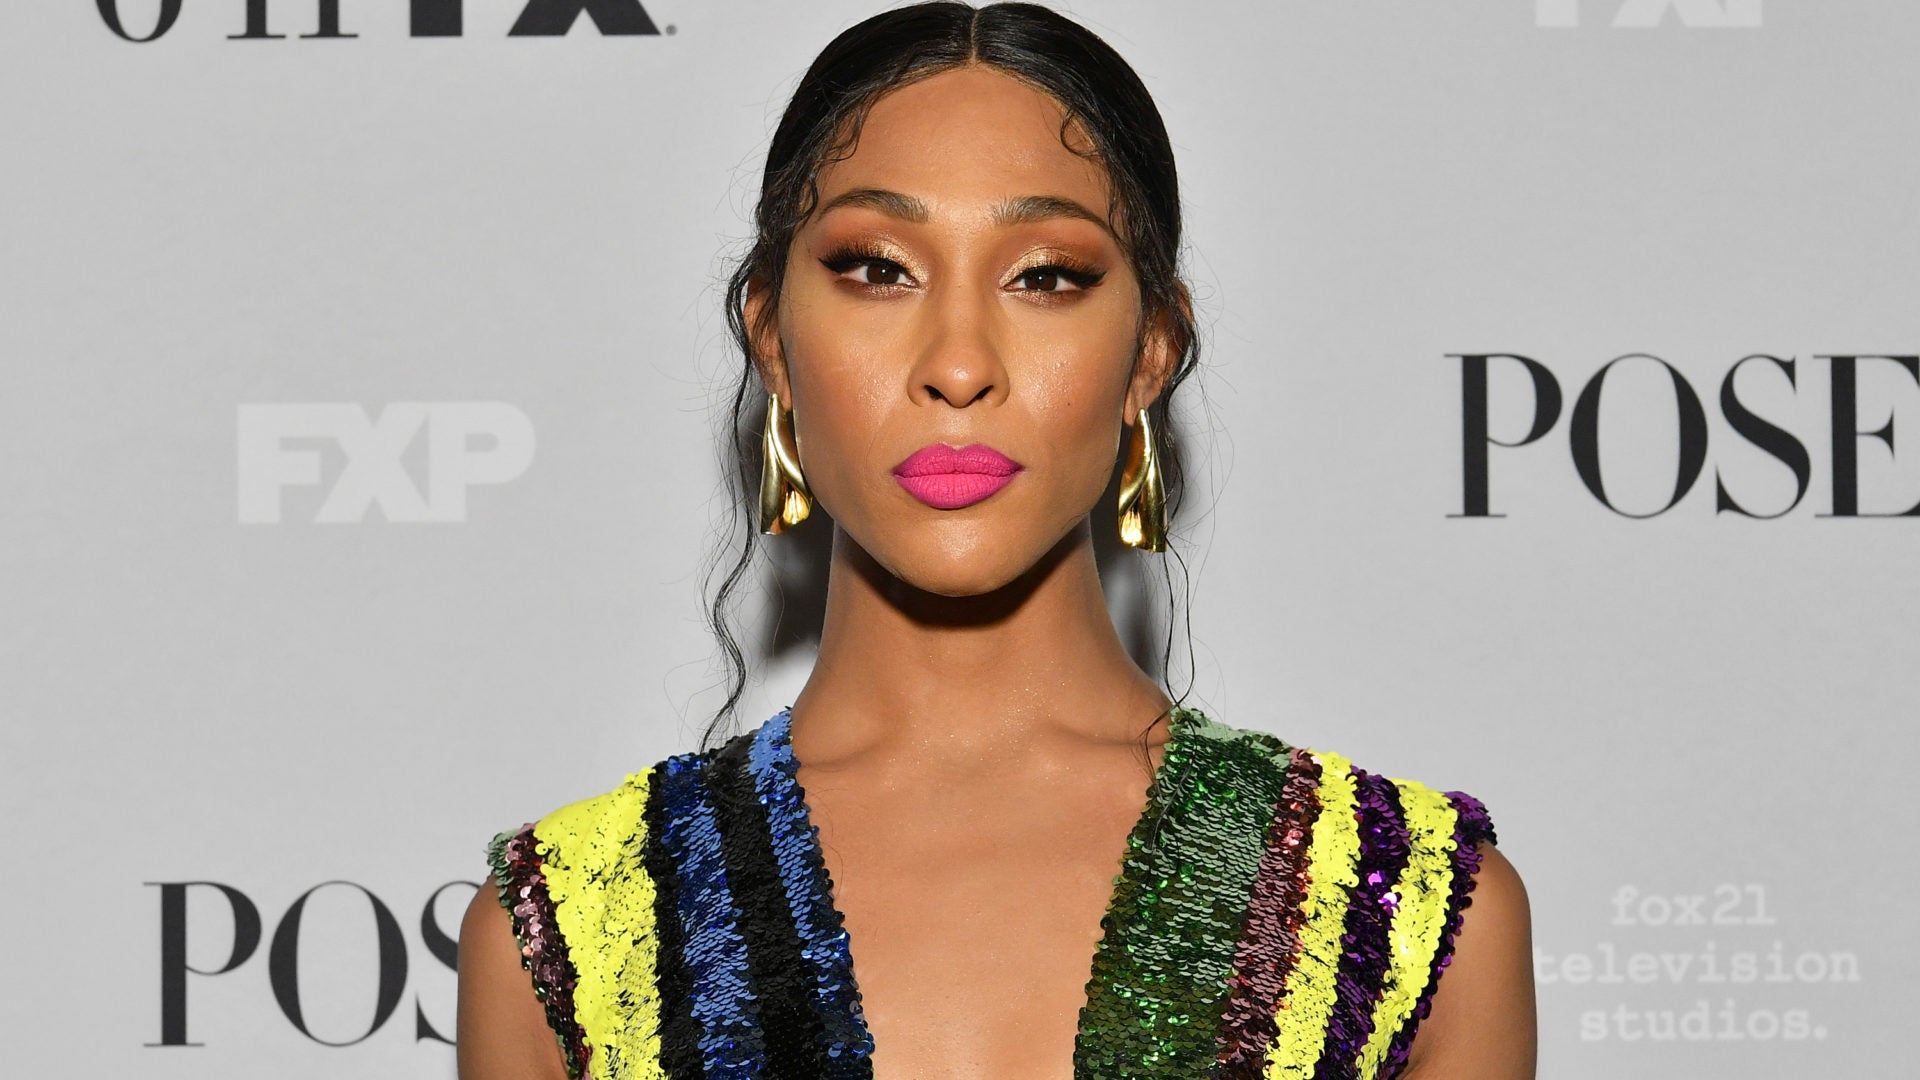 'Pose's' Mj Rodriguez Gets Tearful When Talking Black Trans Women's Deaths: 'I Don't Wanna Cry'